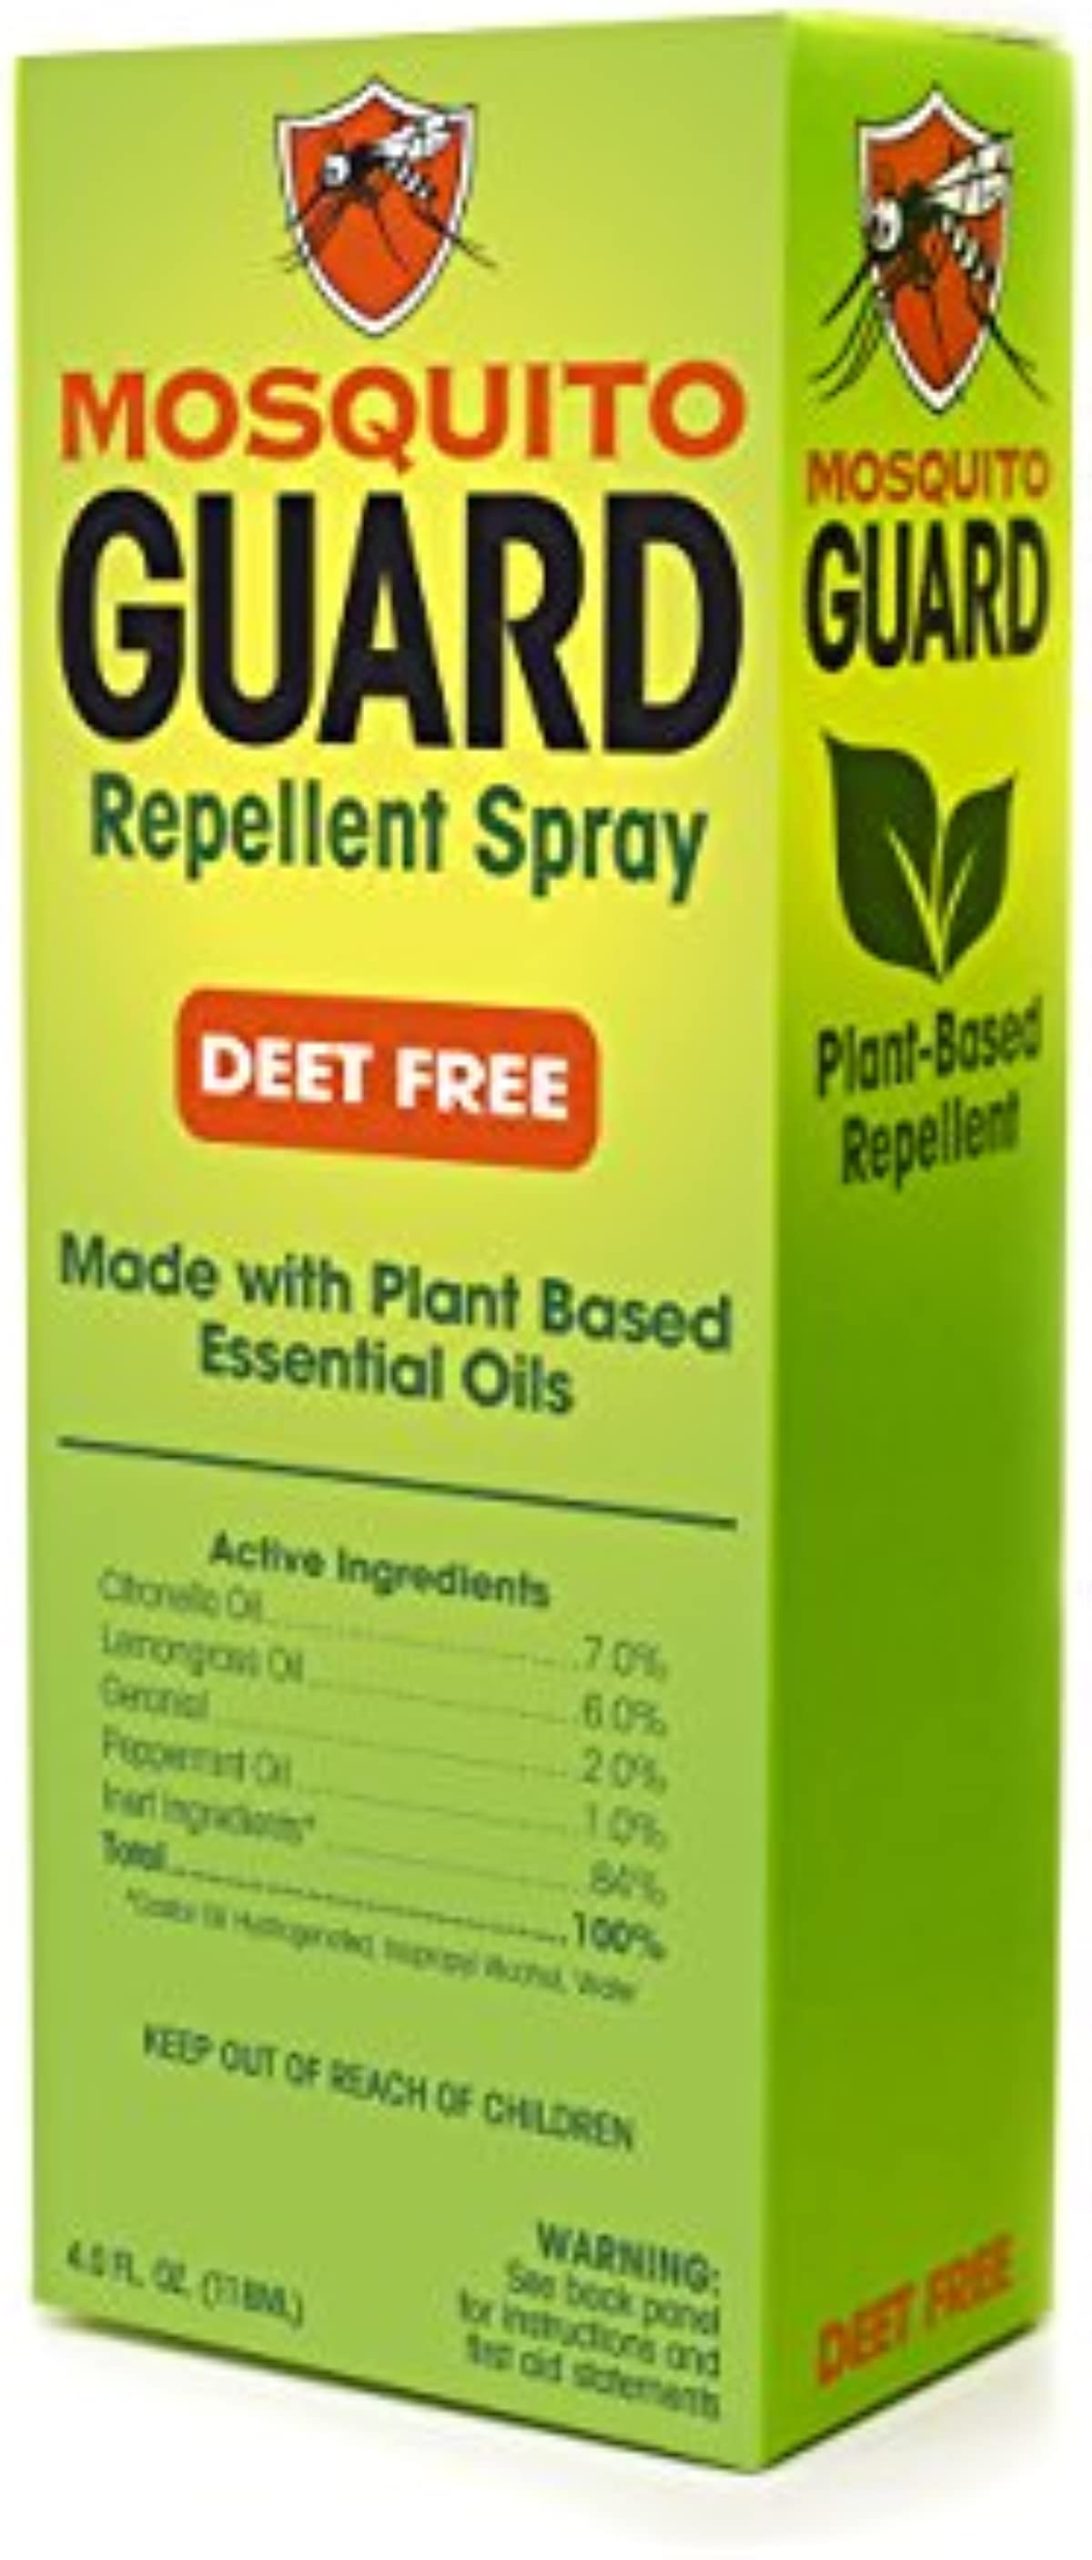 Mosquito Guard Mosquito Repellent Spray - 4oz Travel Bug Spray for People, Natural Mosquito Spray - Mosquito Repellent for Patio and Outdoor